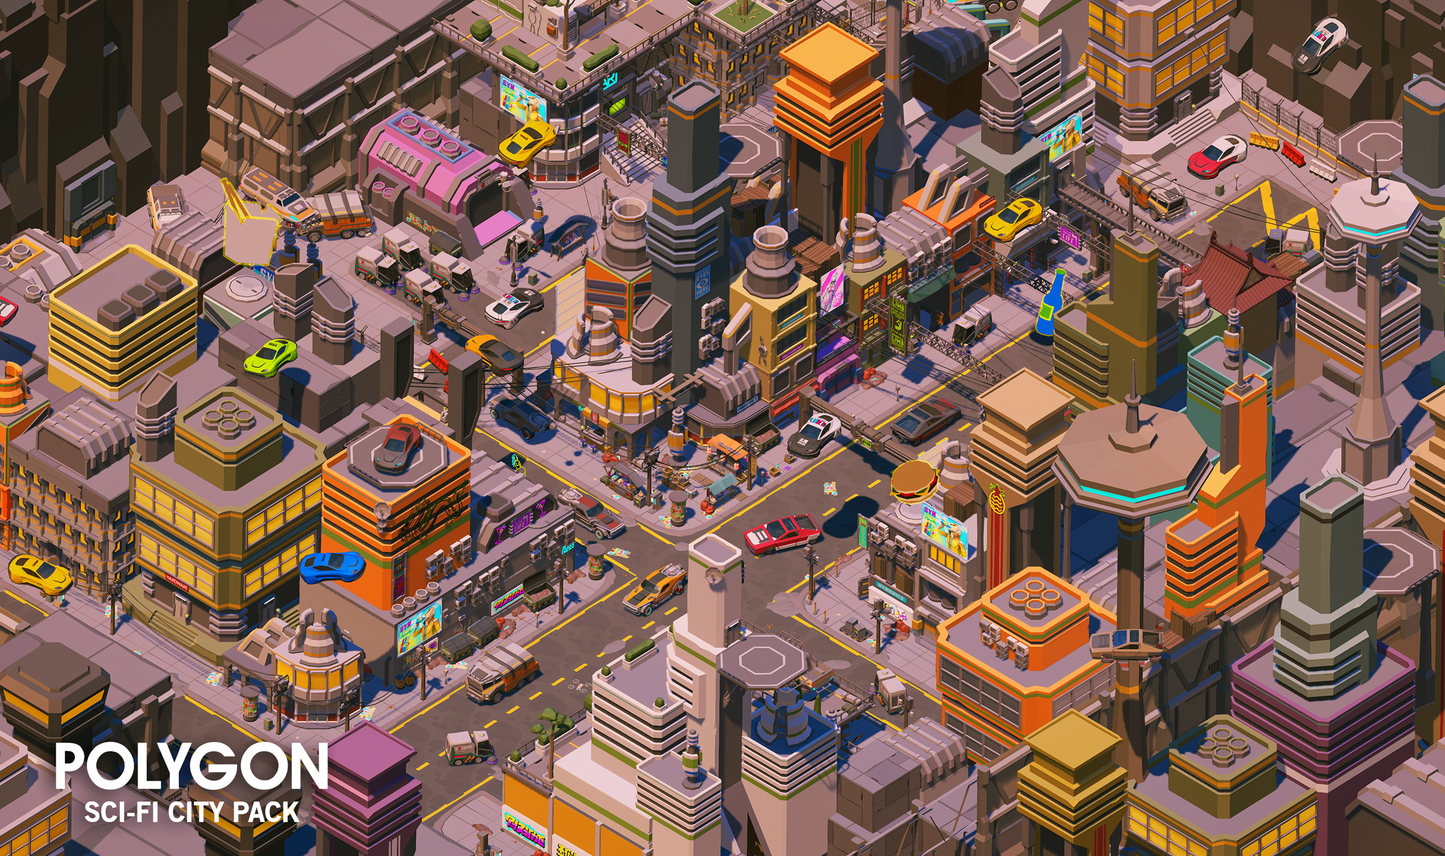 Aerial view of a futurist city built with low poly assets